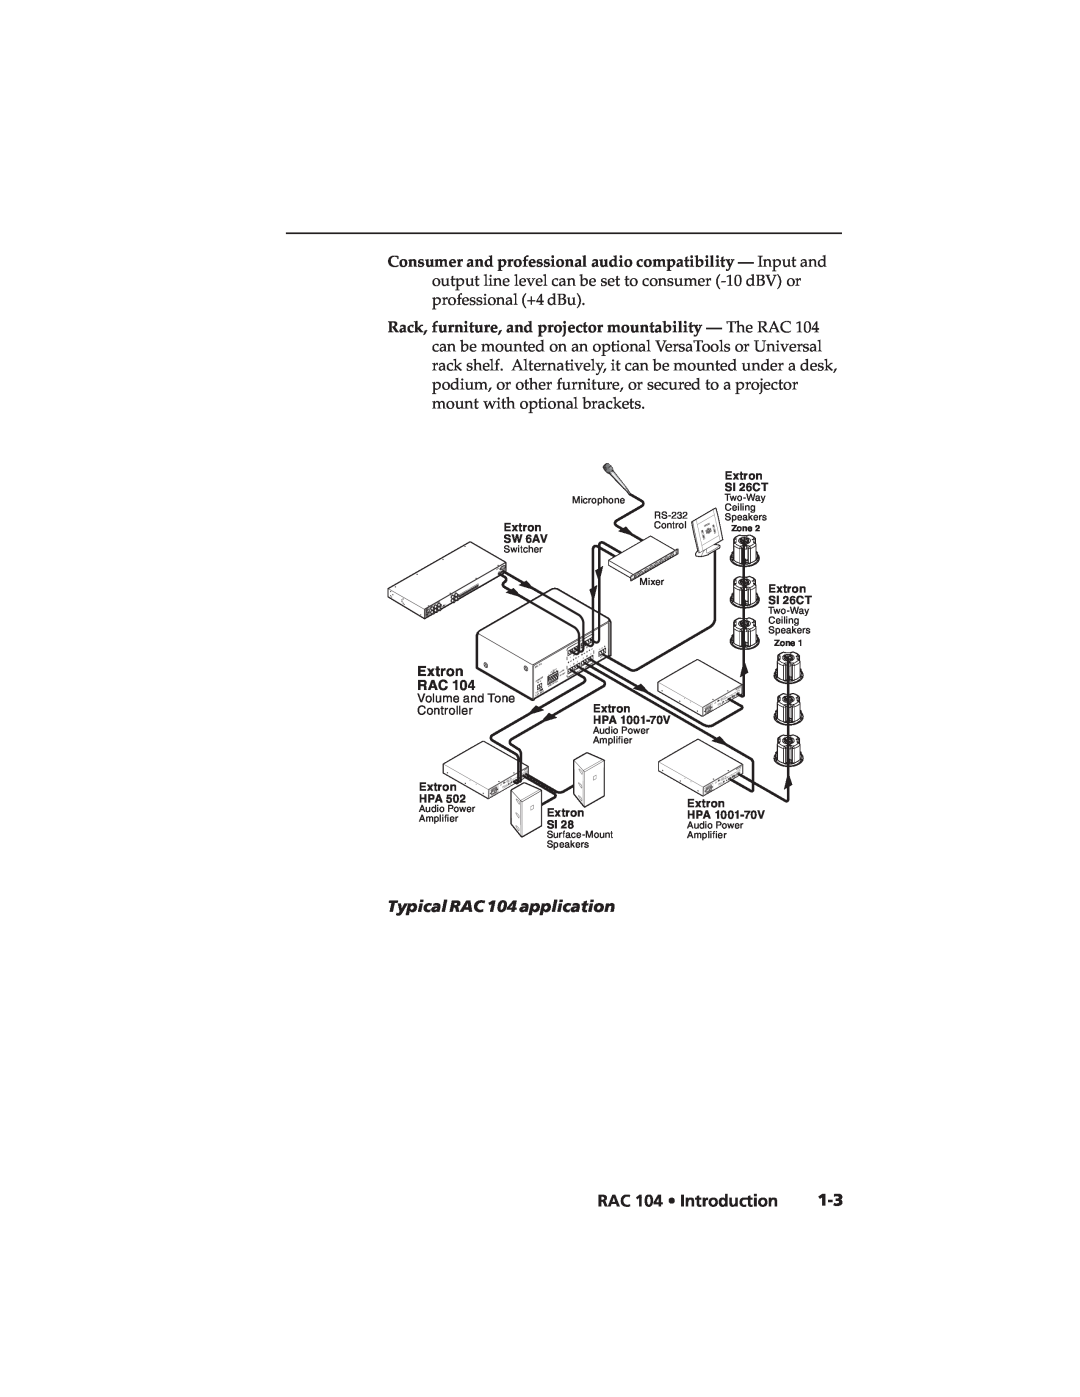 Extron electronic user manual RAC 104 Introduction, Typical RAC 104 application 